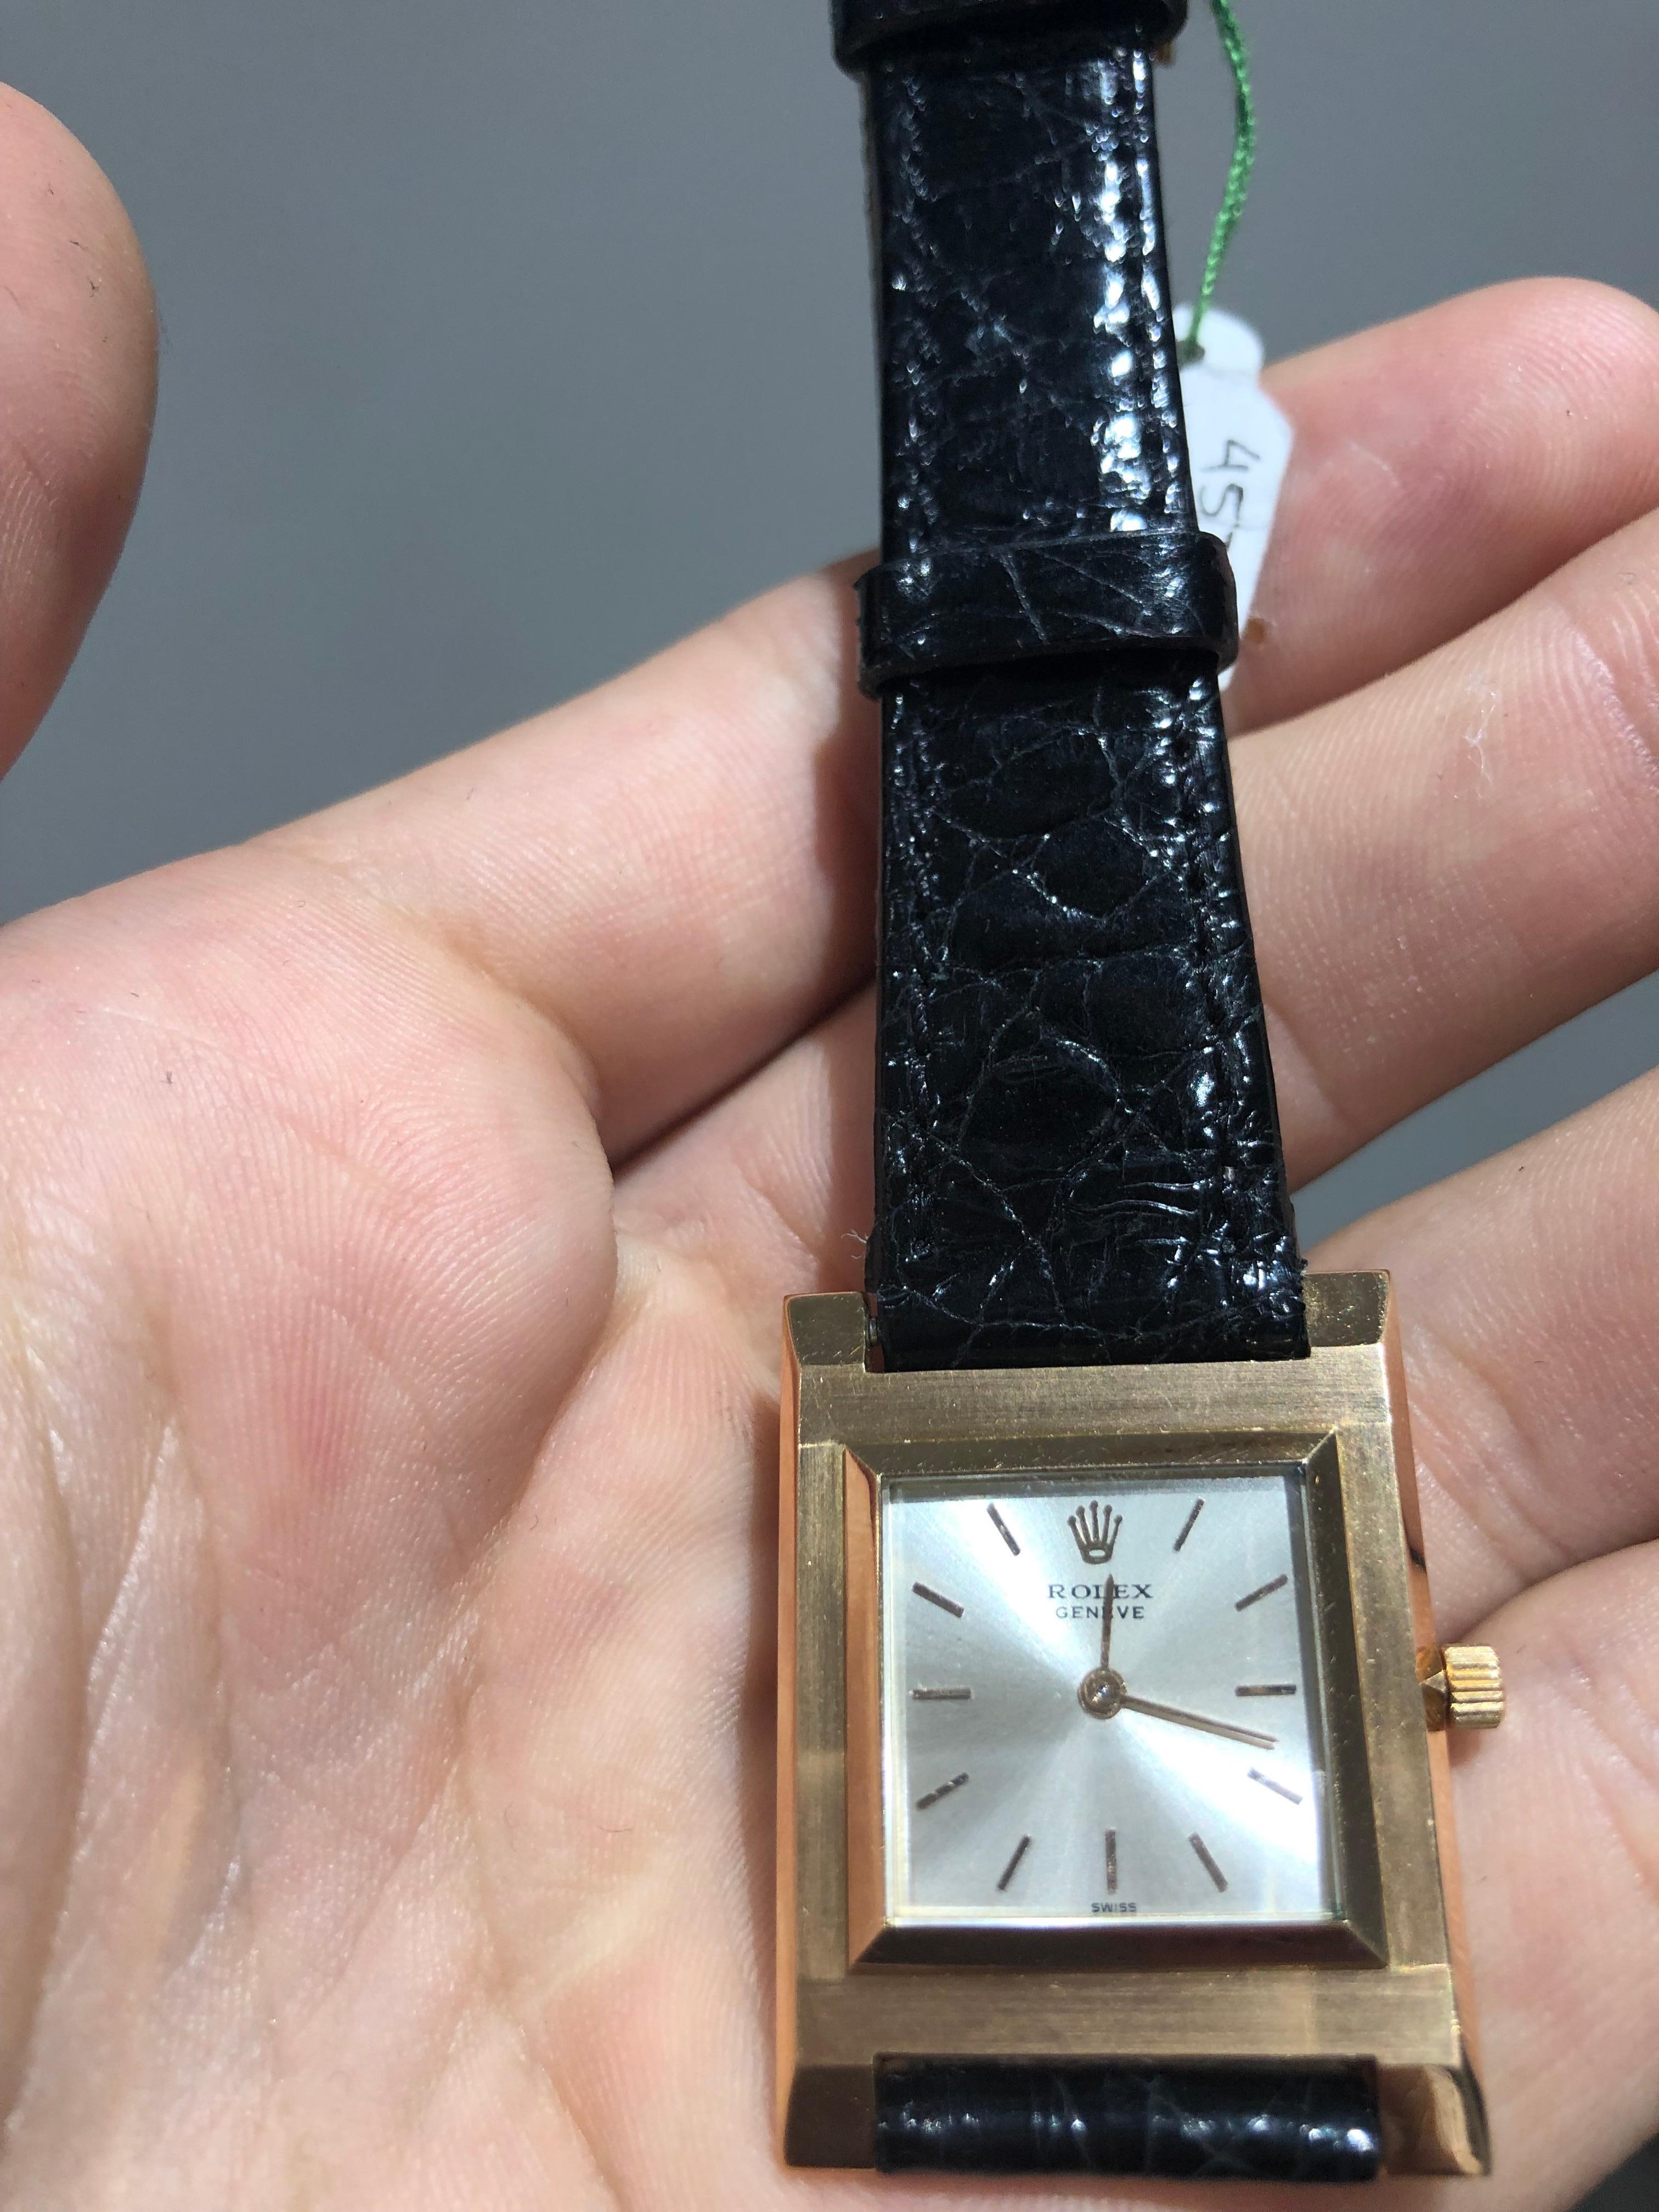 An 18k Rose Gold Vintage Cellini Gents Wristwatch from the year 1959, silver dial with applied index batons, an 18k rose gold stepped bezel, an original brand new black leather strap with an 18k yellow gold pin buckle, sapphire glass, manual wind